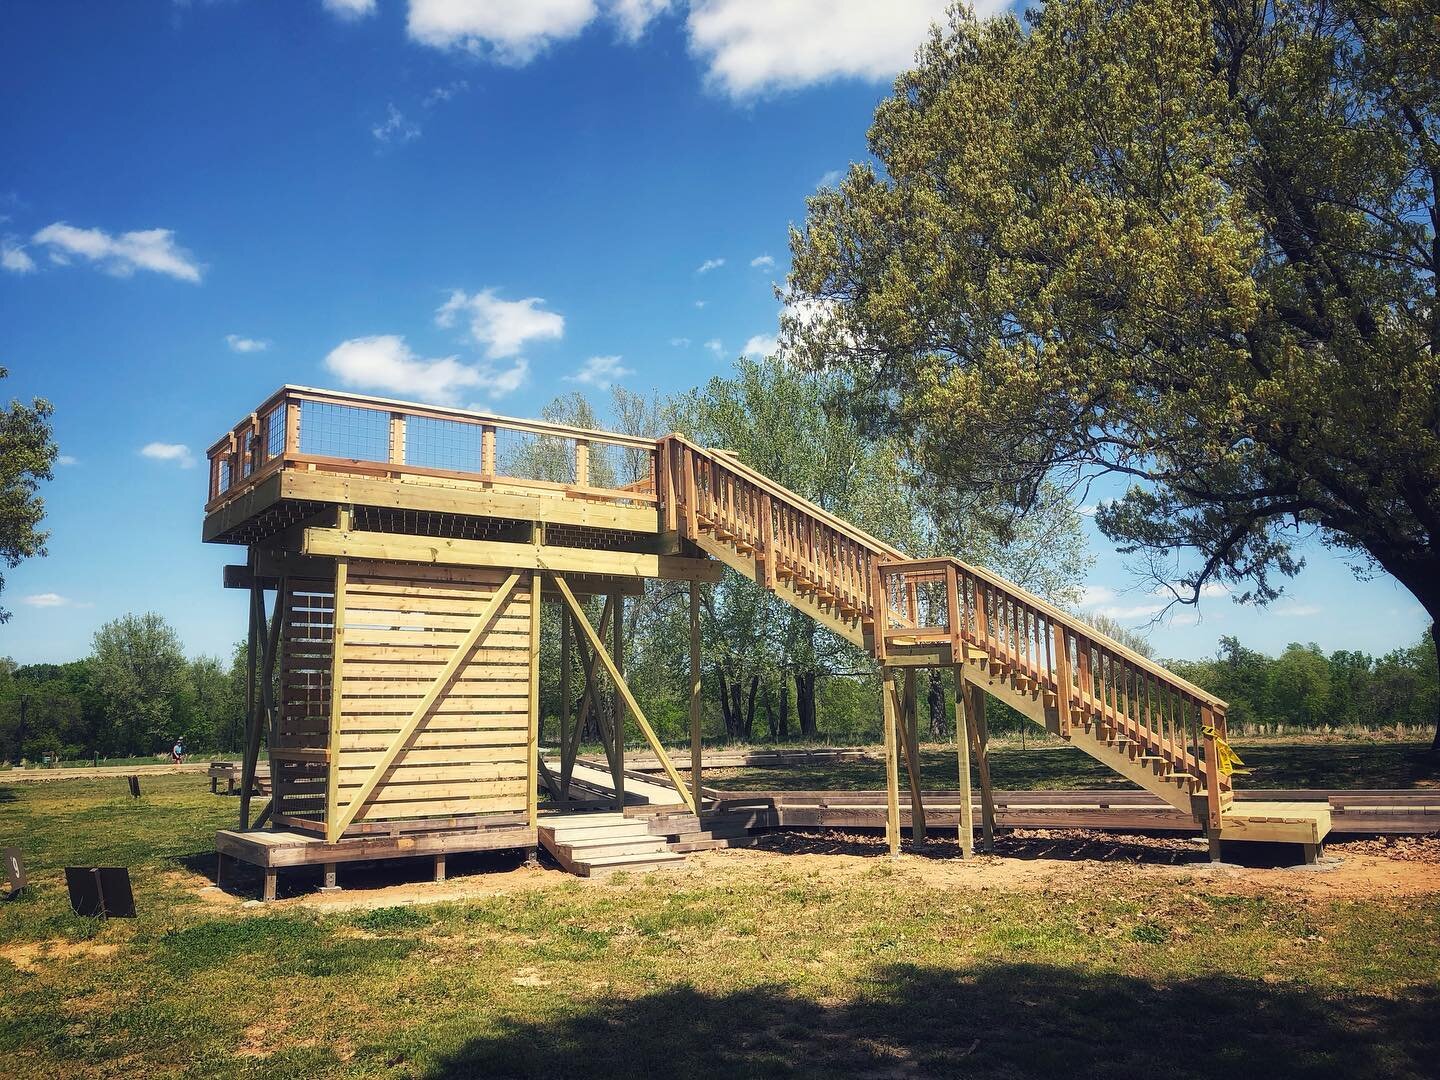 Design and build for a raised archery platform at the Game and Fish Nature Center.  Thanks to the whole team for pulling together to get this one done!
.
@arkansasgameandfish